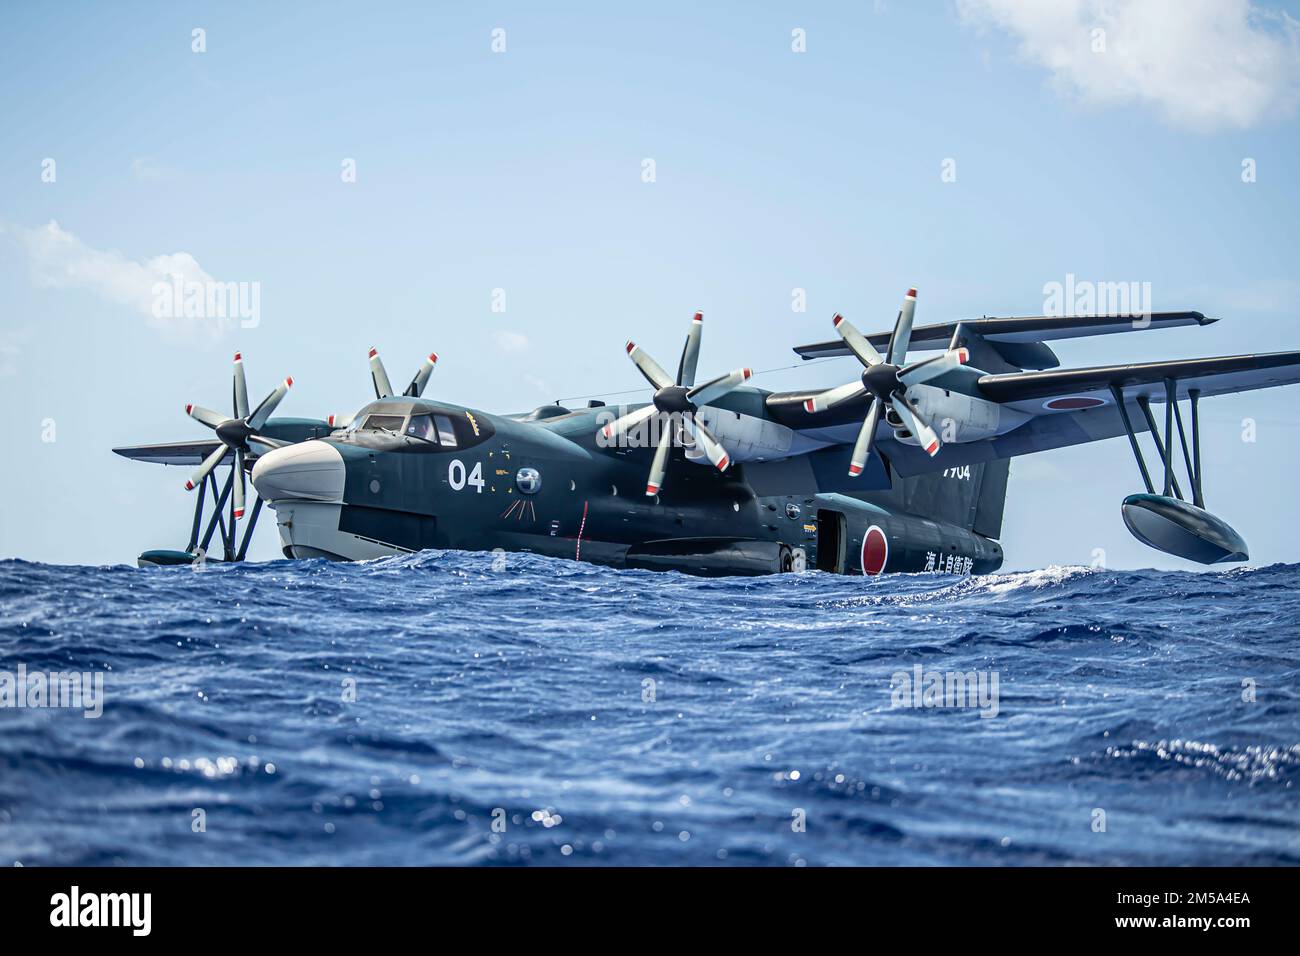 A Japanese ShinMaywa US-2 floats in the ocean during exercise Cope North 22 at the Island of Tinian near Andersen Air Force Base, Guam, Feb. 14, 2022. Japanese and U.S. Air Force members trained together in participation of Cope North 2022, multilateral U.S. Pacific Air Forces-sponsored field training exercise conducted annually at Andersen AFB, Guam focused on combat air forces’ large-force employment and humanitarian assistance and disaster relief training to enhance interoperability among U.S., Australian, and Japanese forces. Stock Photo